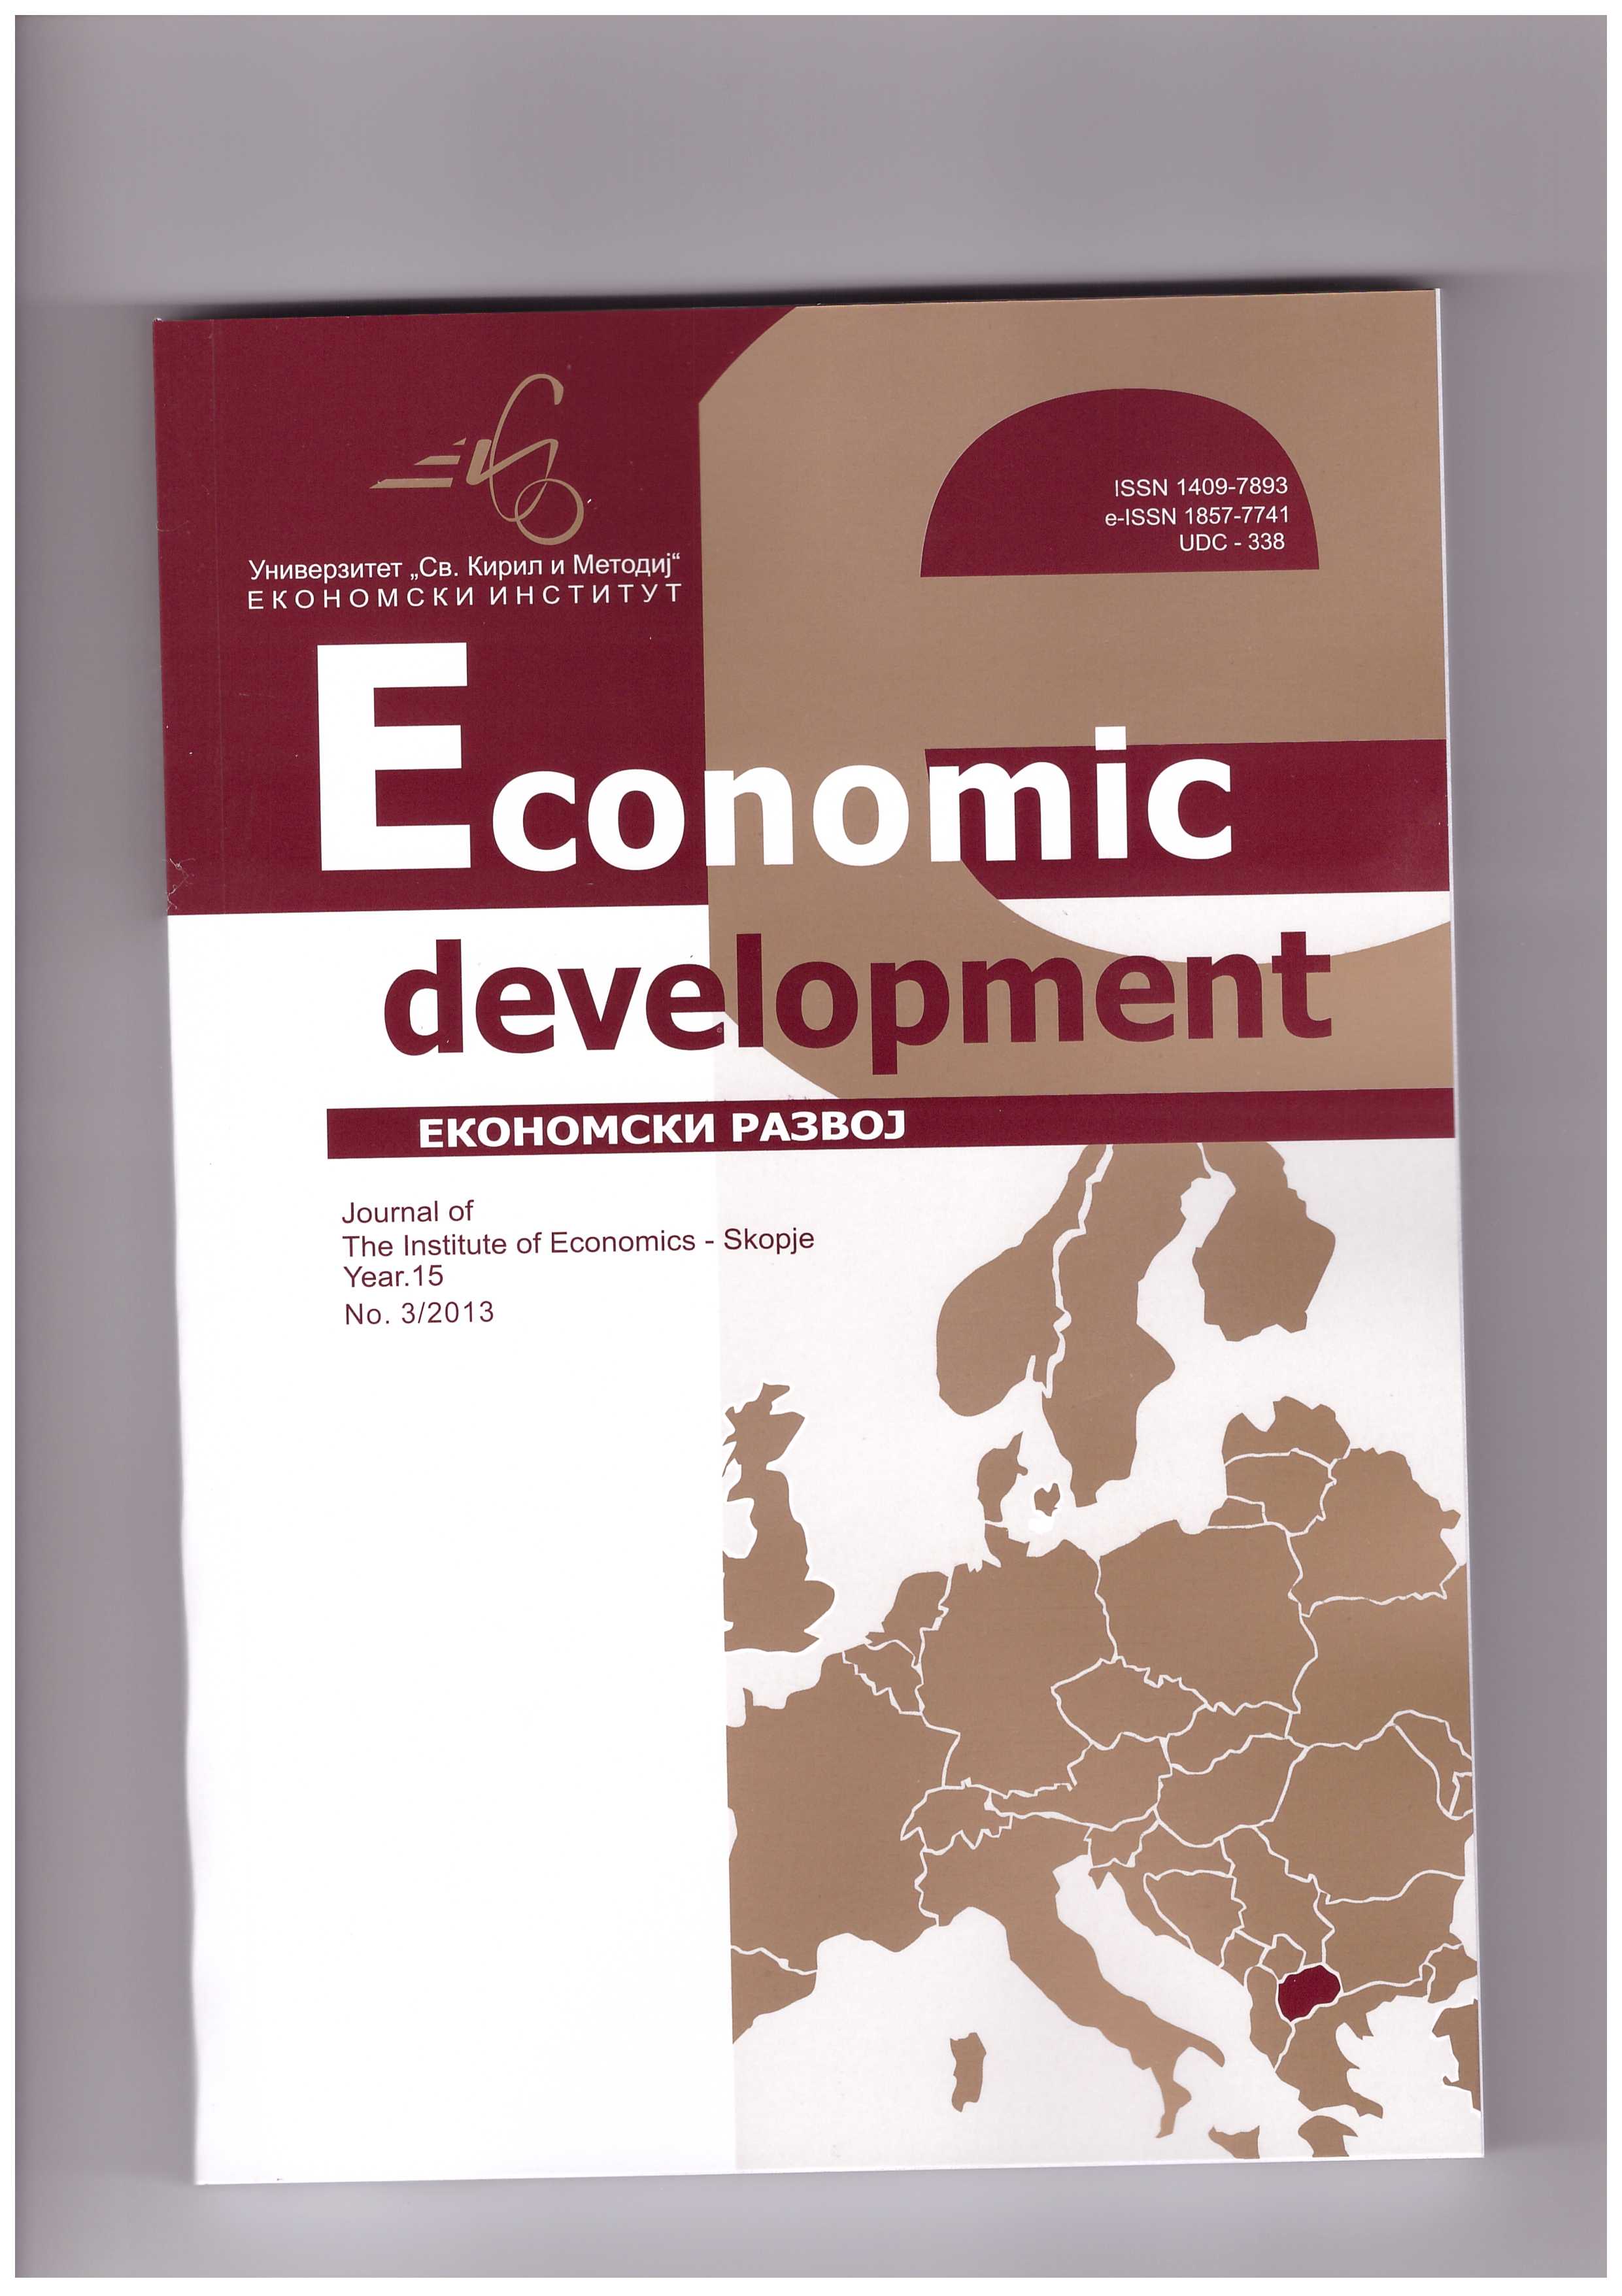 Implications and aftermath effects of the financial crisis on startups in EU Cover Image